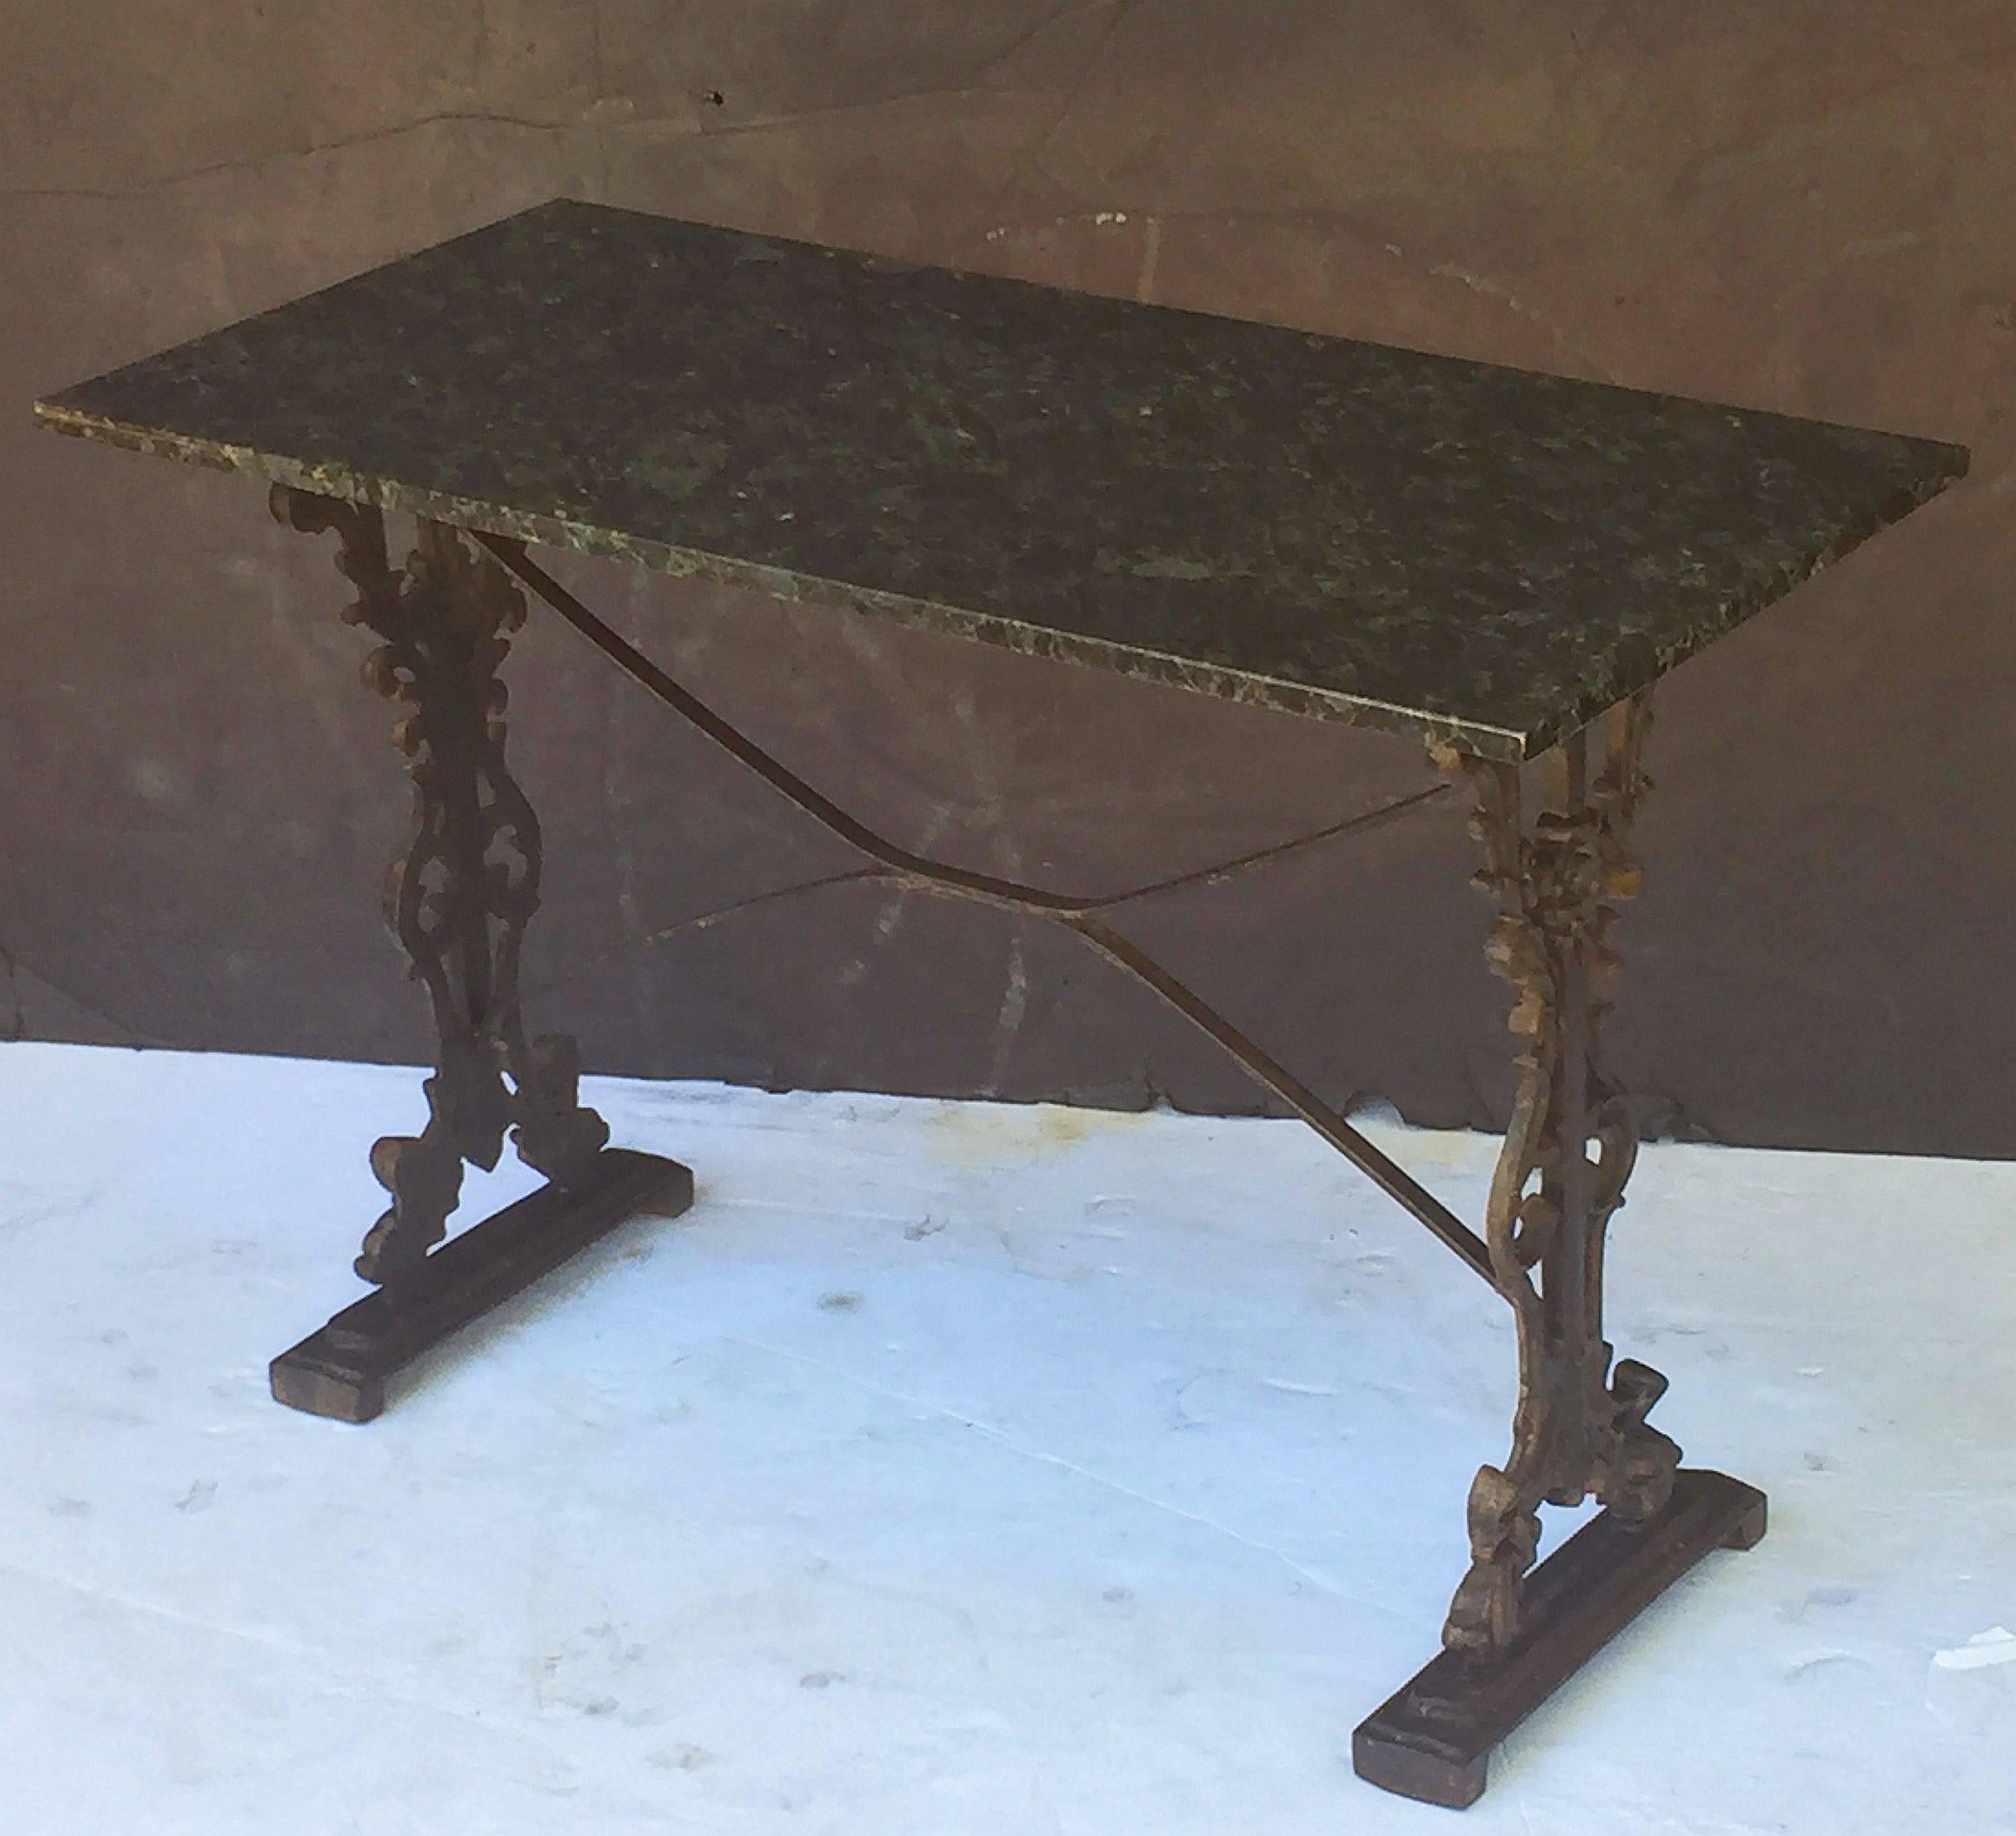 A pair of handsome English pub or bistro tables - each with a figured, rectangular granite top with a wood mount below, set upon a cast iron base with fine scroll work and sturdy bracket feet.

There are two available for sale.
Individually priced -